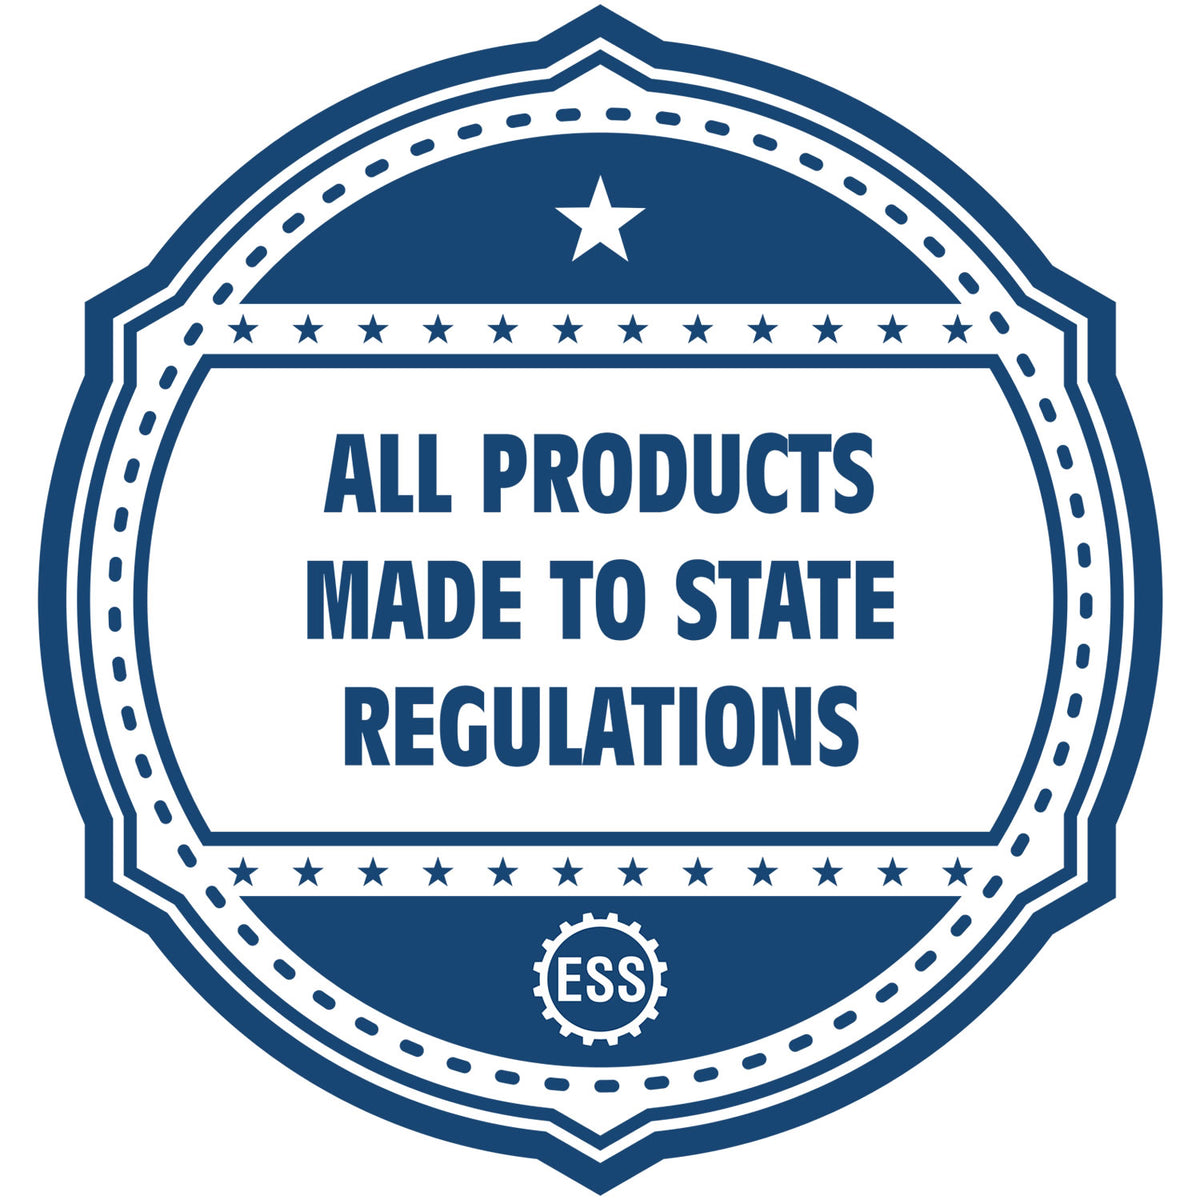 An icon or badge element for the State of Texas Extended Long Reach Engineer Seal showing that this product is made in compliance with state regulations.